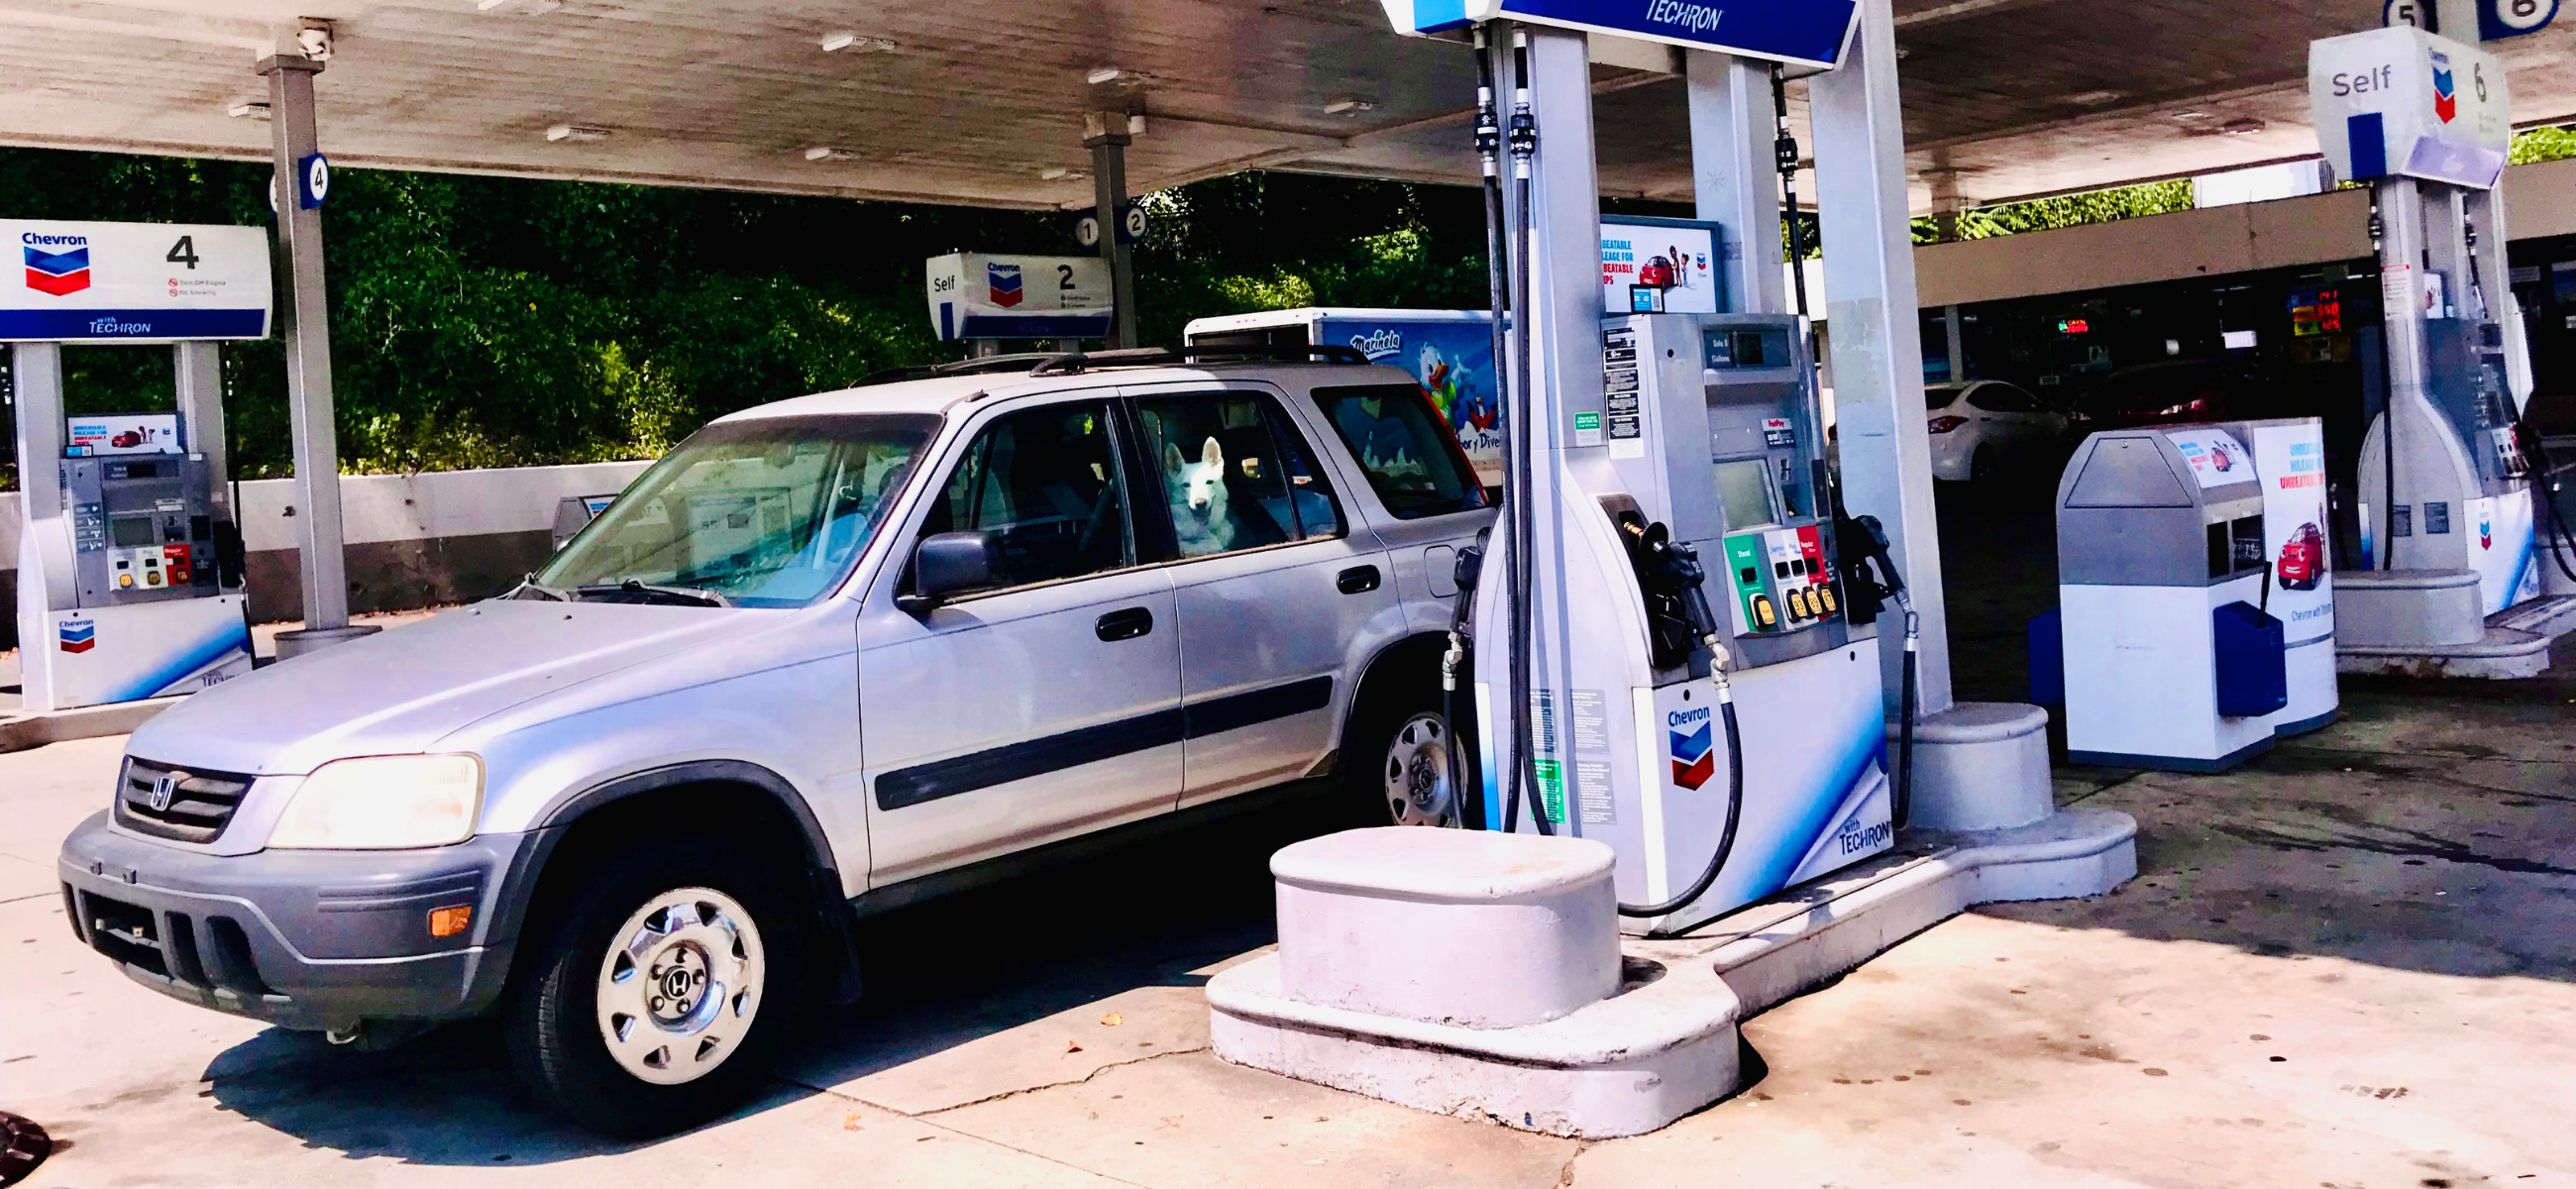 Gov. Kemp’s executive order to suspend fuel taxes will save Georgians 31 cents on a gallon of regular gasoline and 35 cents on diesel fuel through mid-October. (Credit: Jill Jordan Sieder).